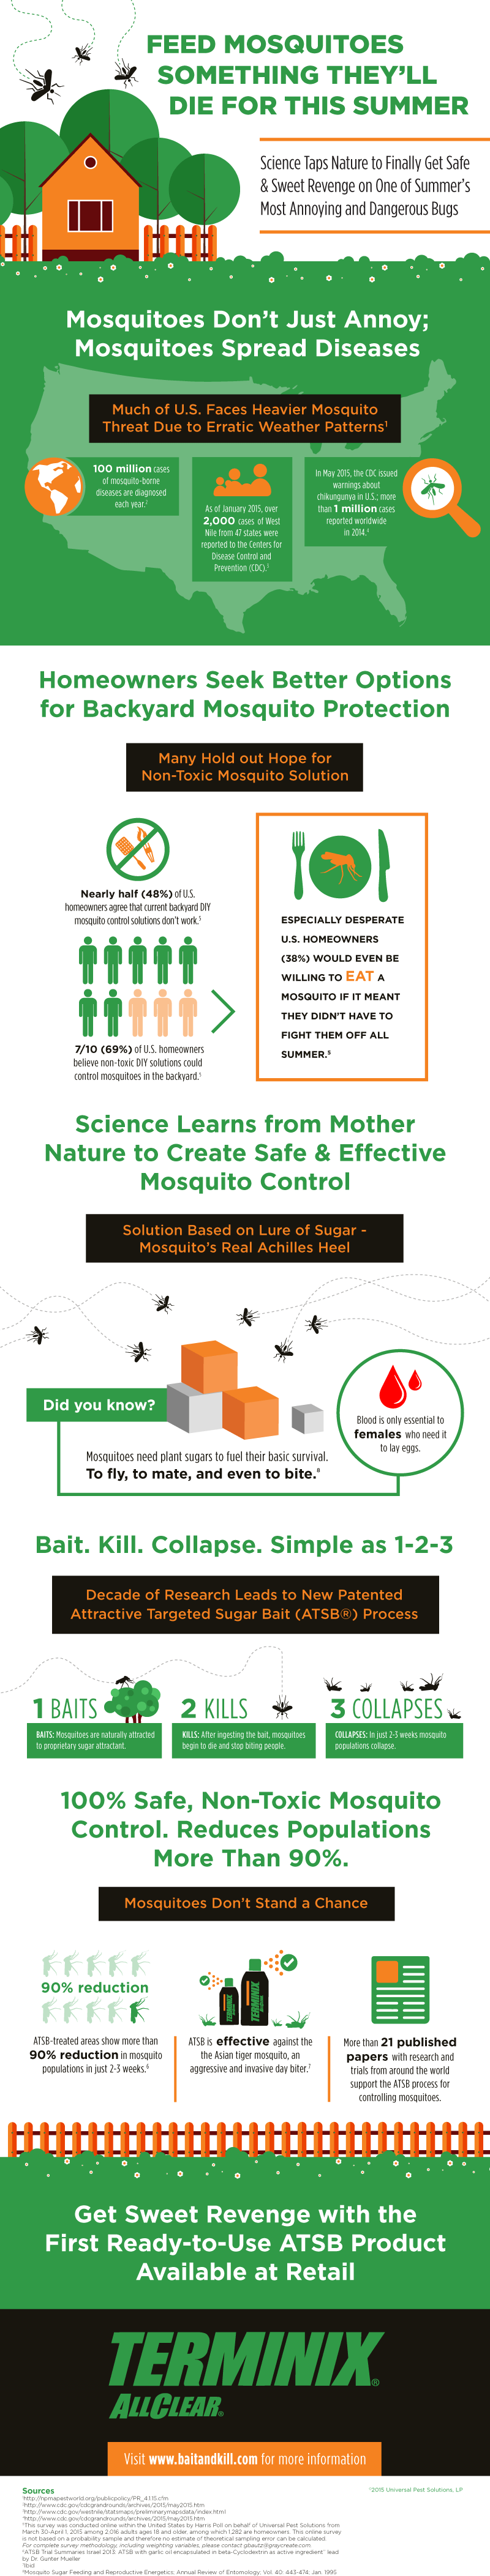 Feed Mosquitoes Something They'll Die For This Summer